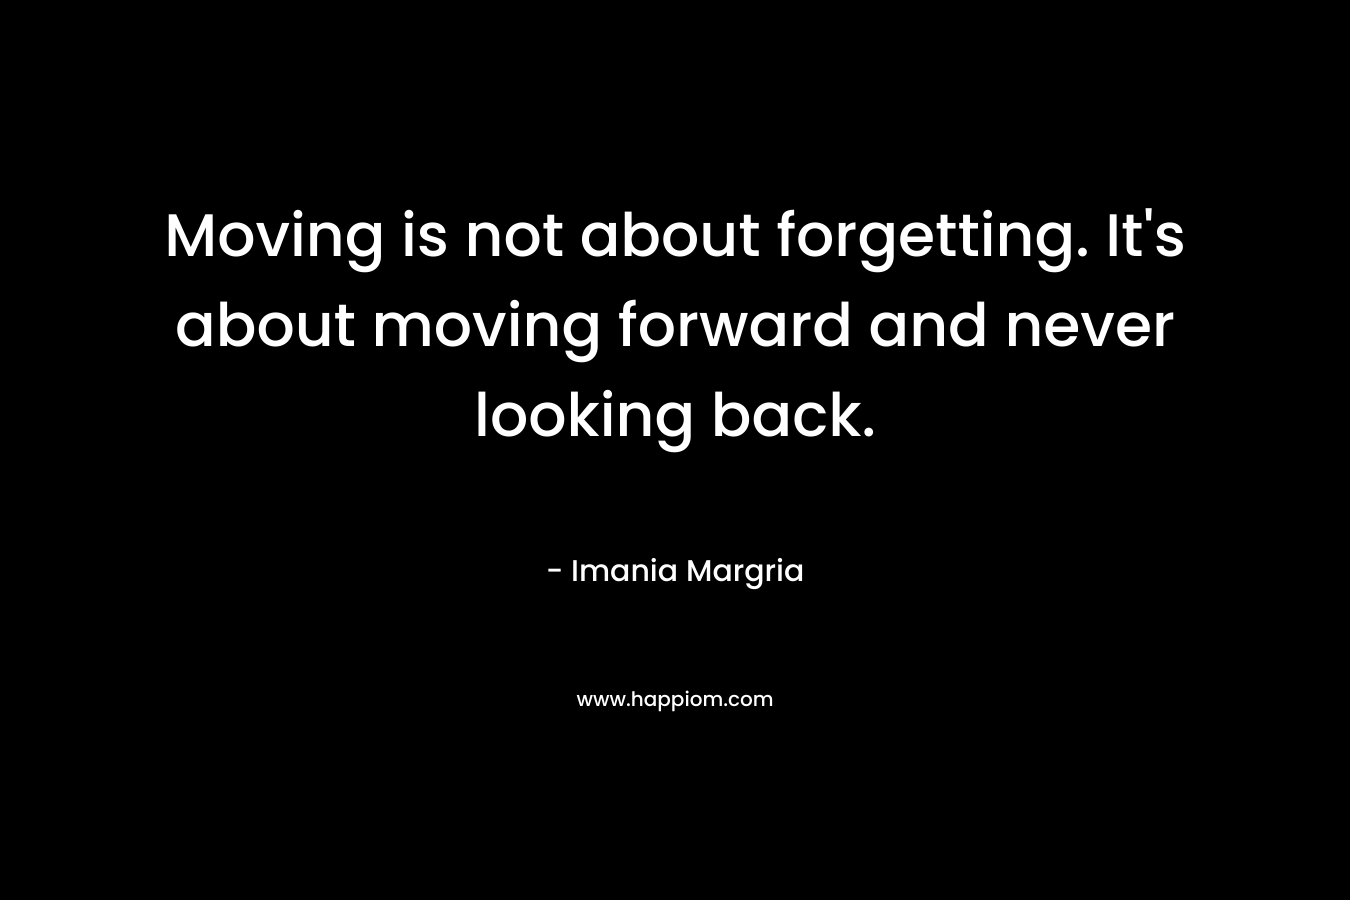 Moving is not about forgetting. It's about moving forward and never looking back.